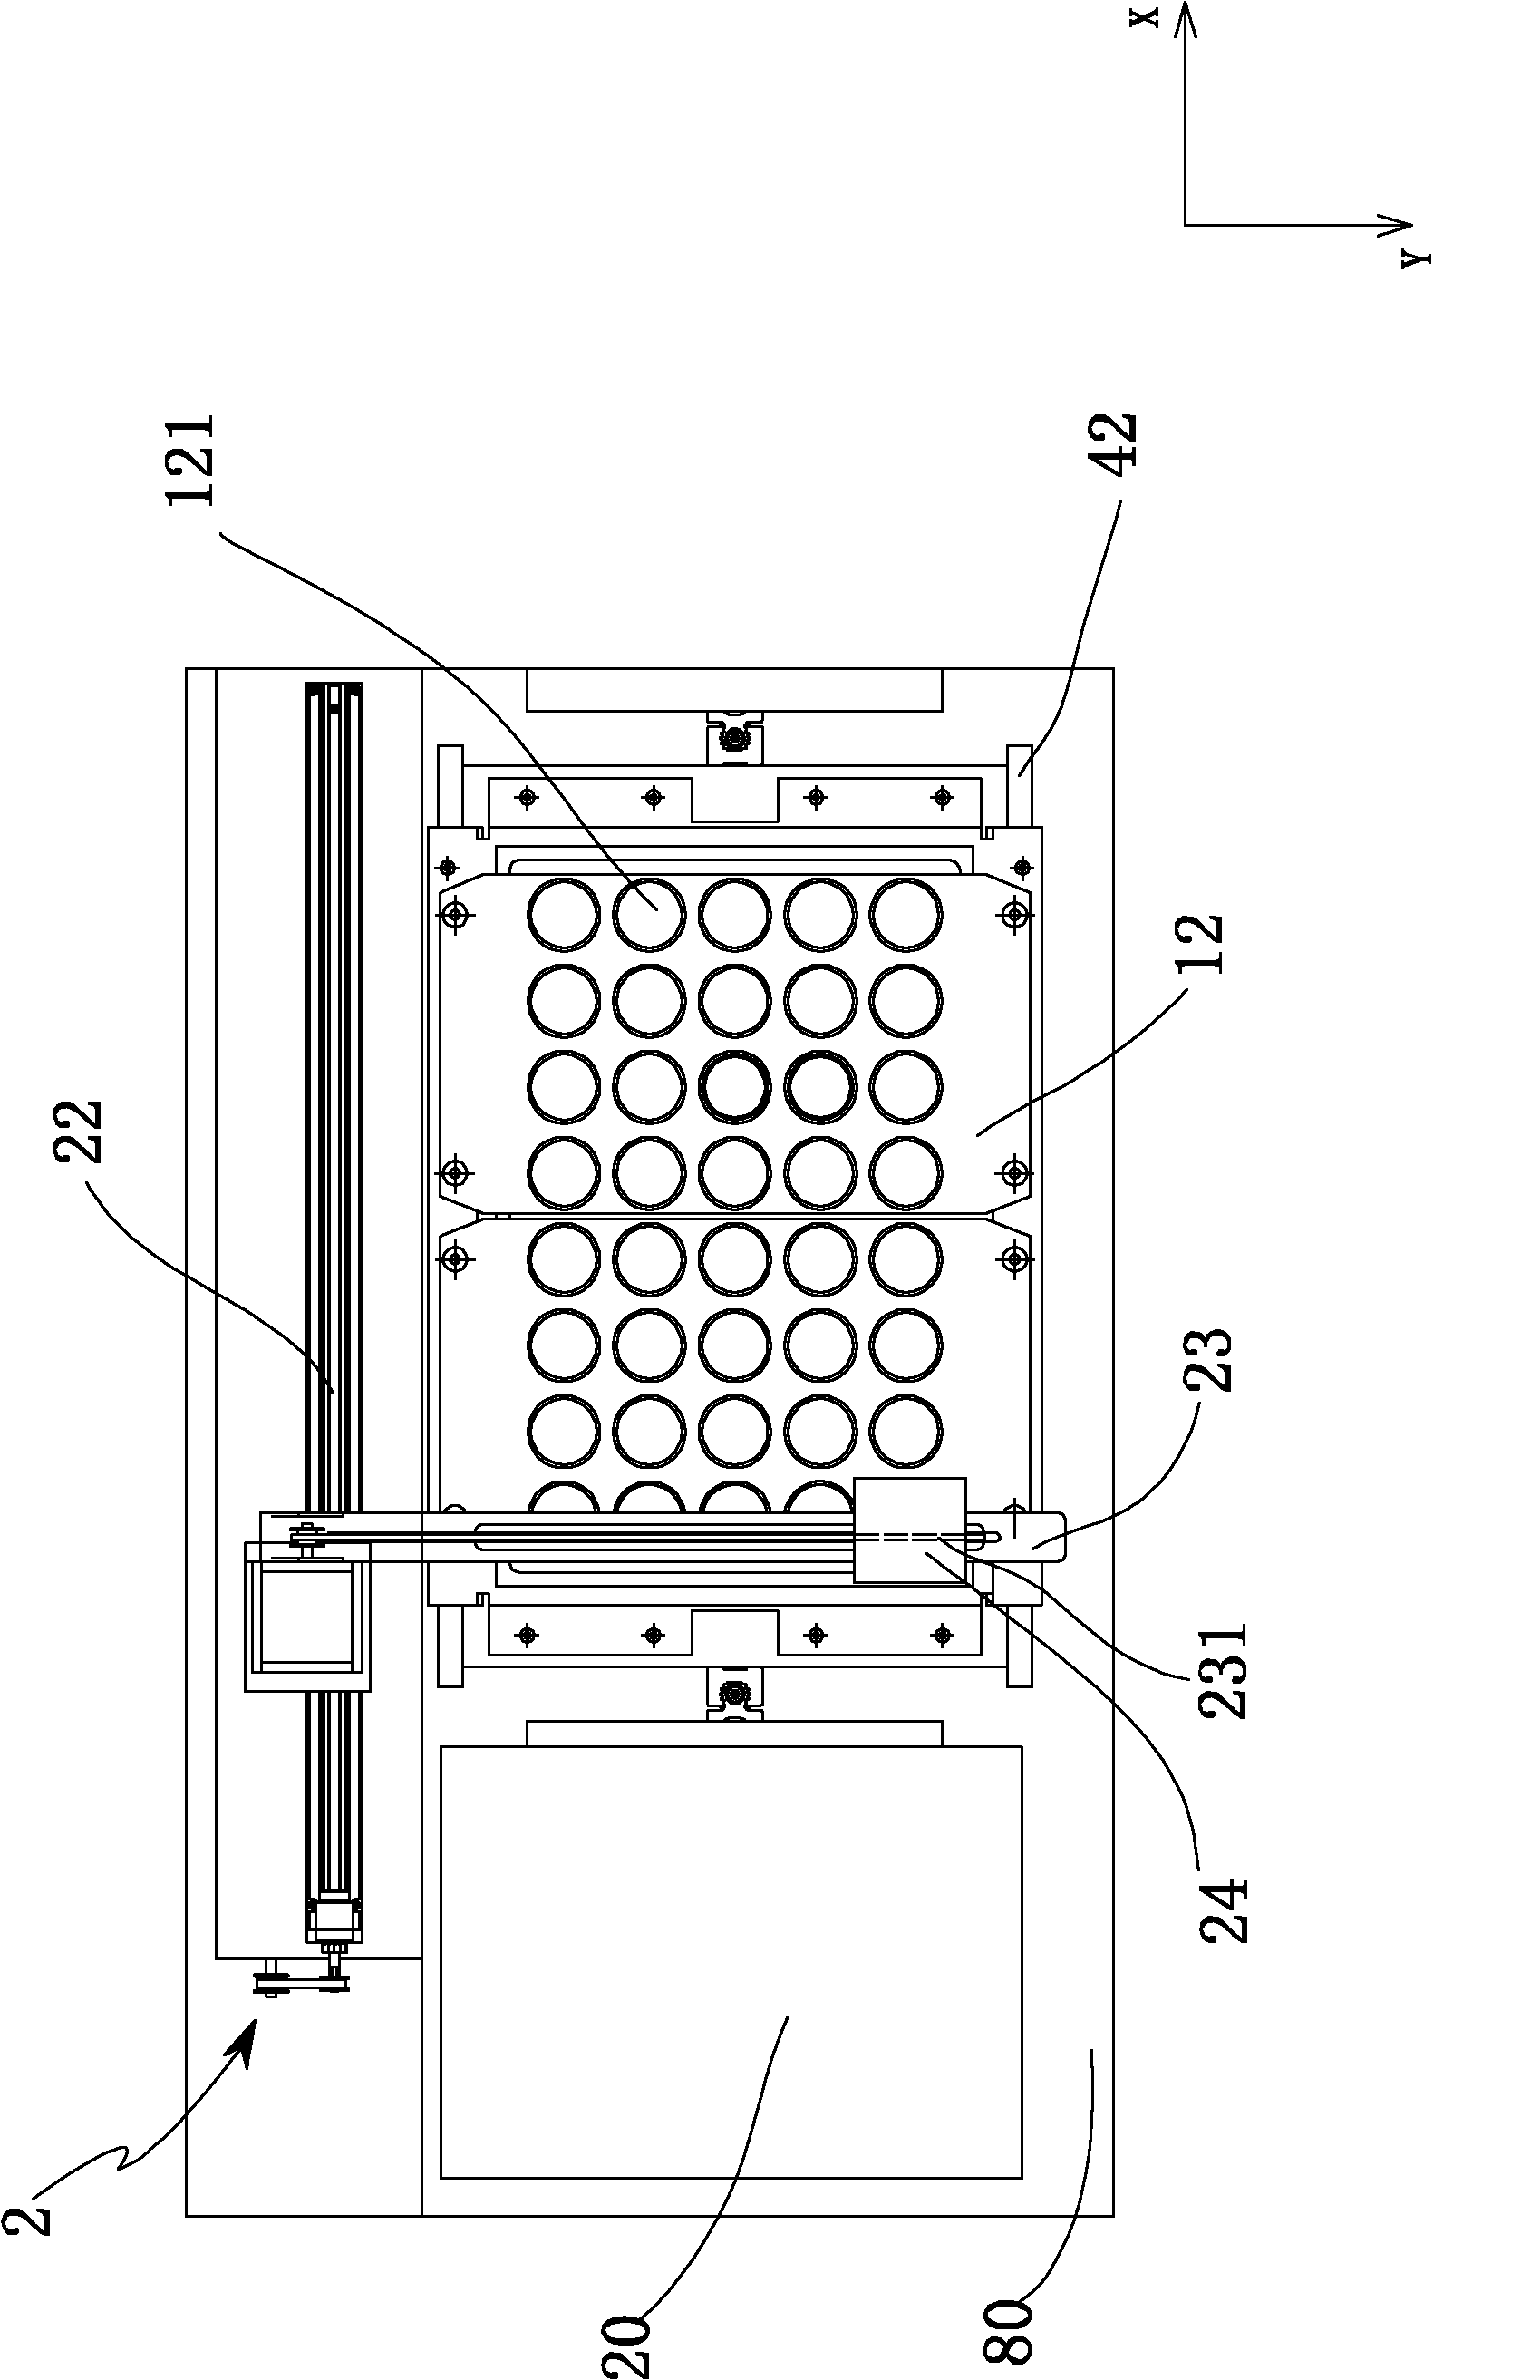 Sample digestion processing device